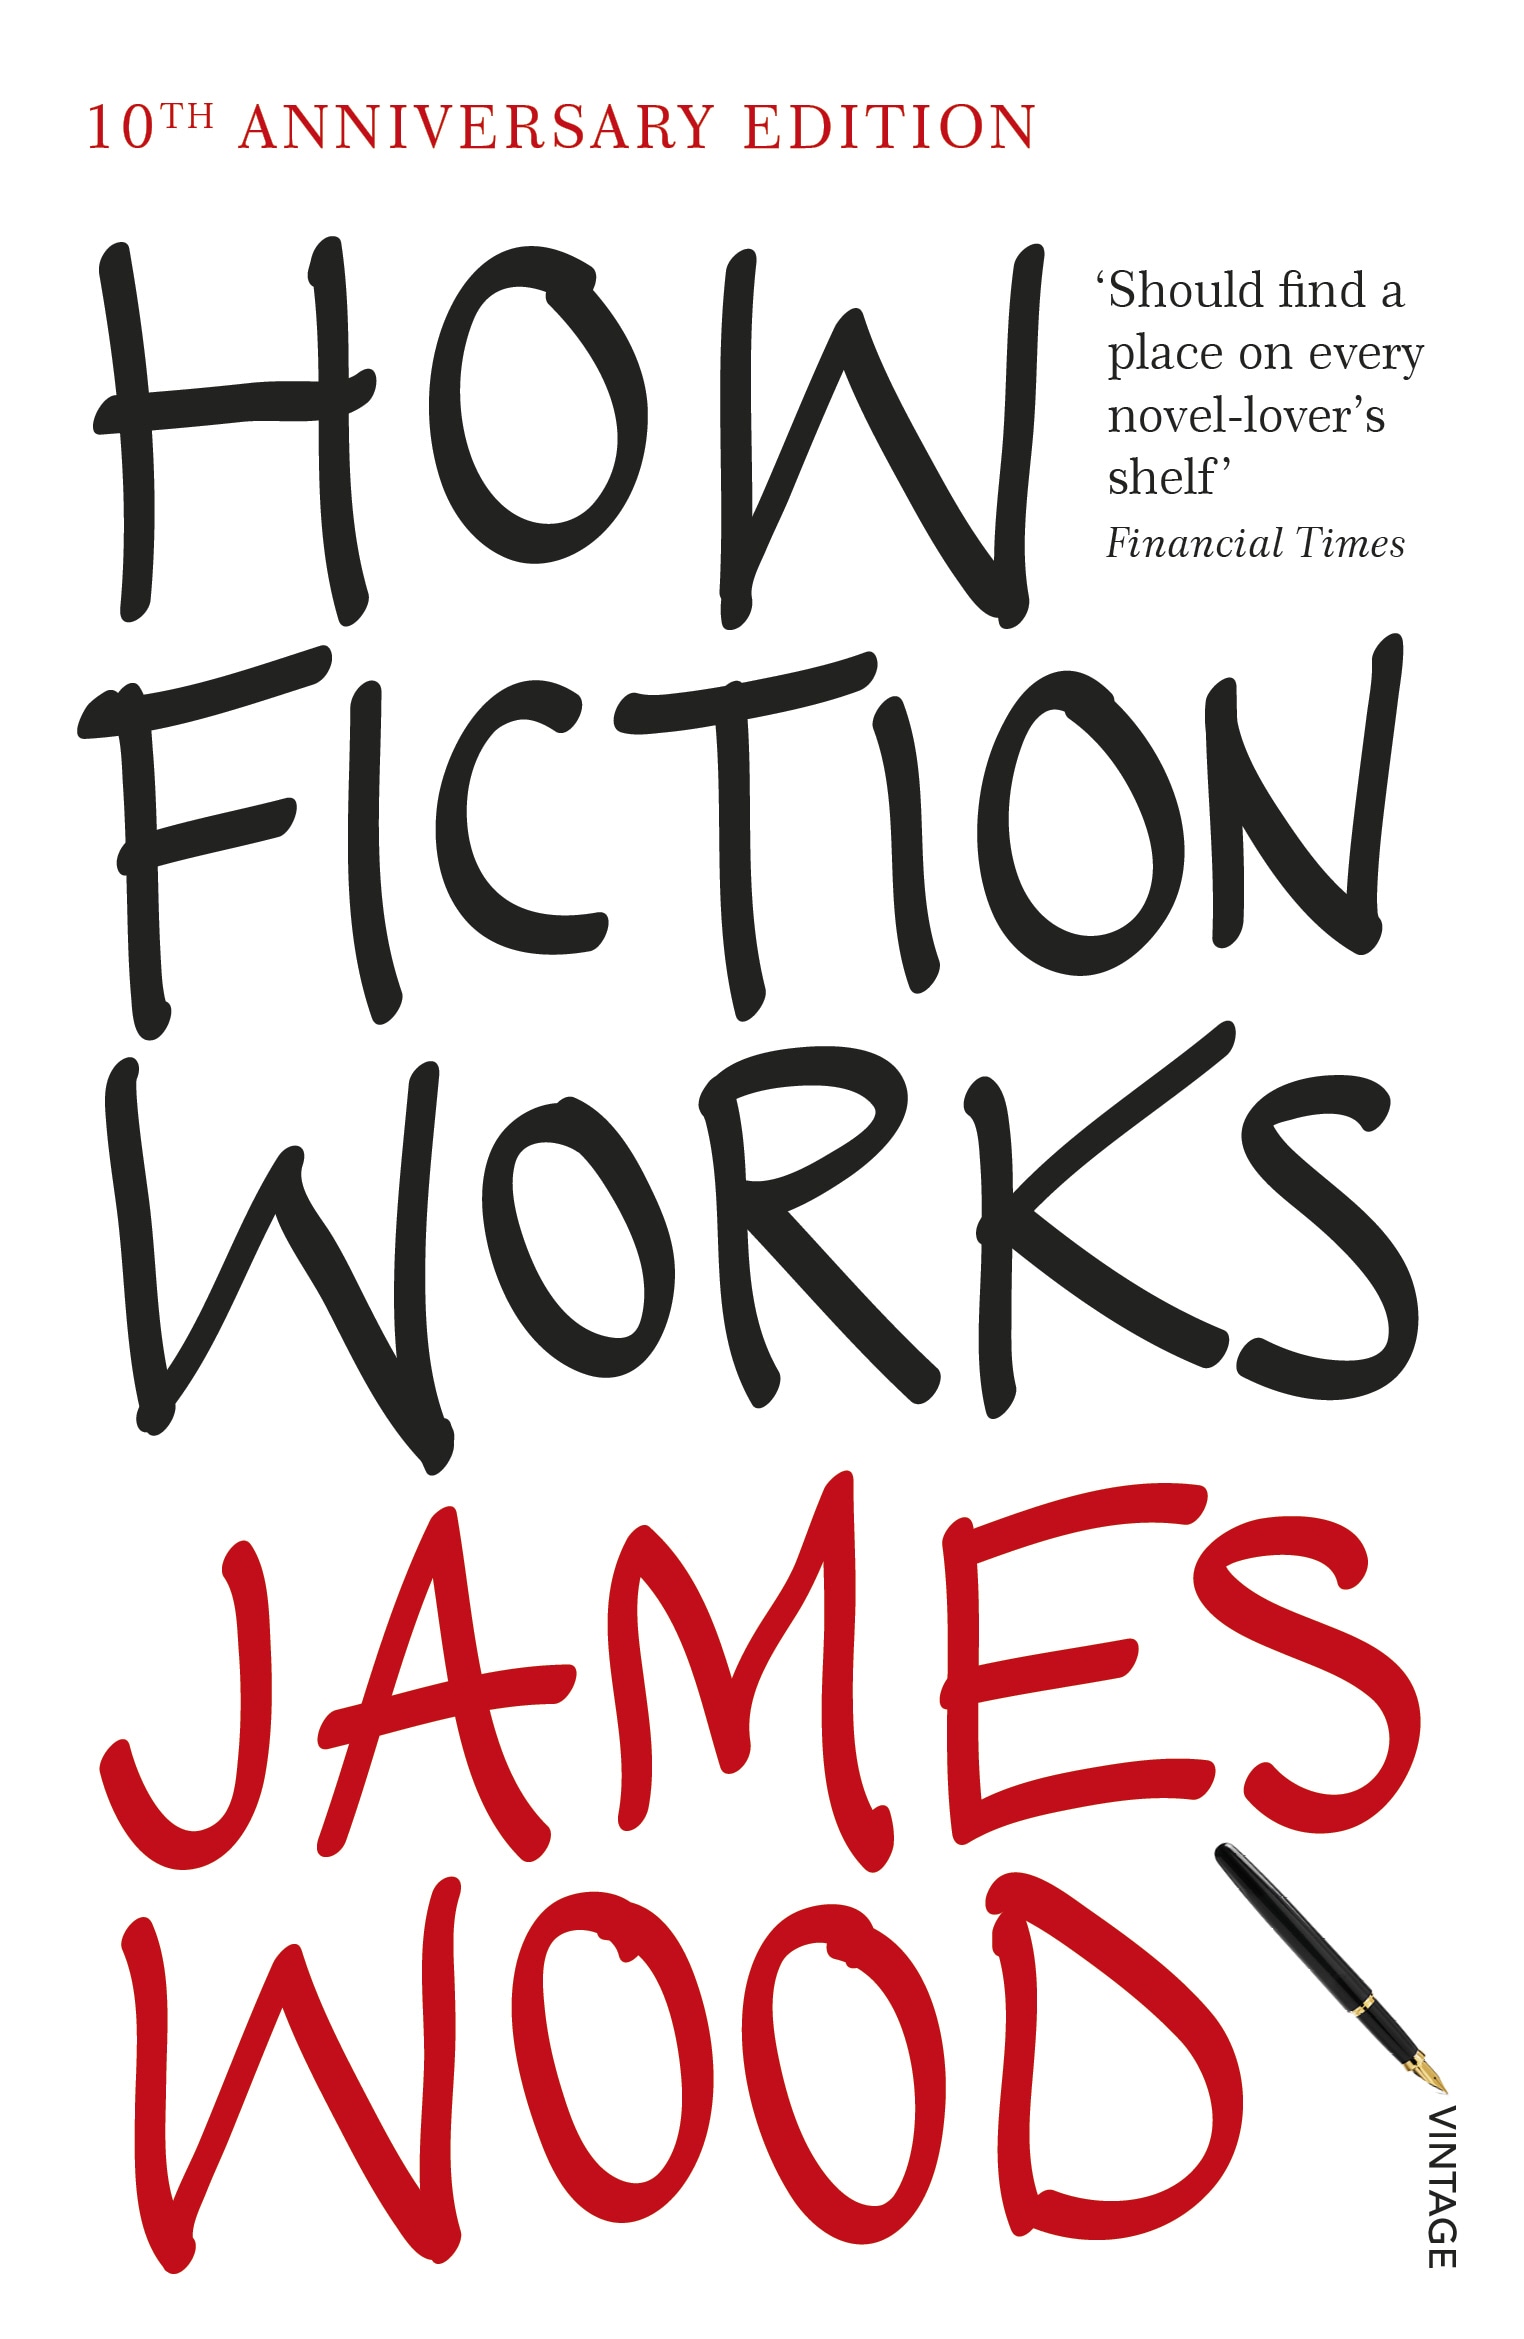 Book “How Fiction Works” by James Wood — February 5, 2009